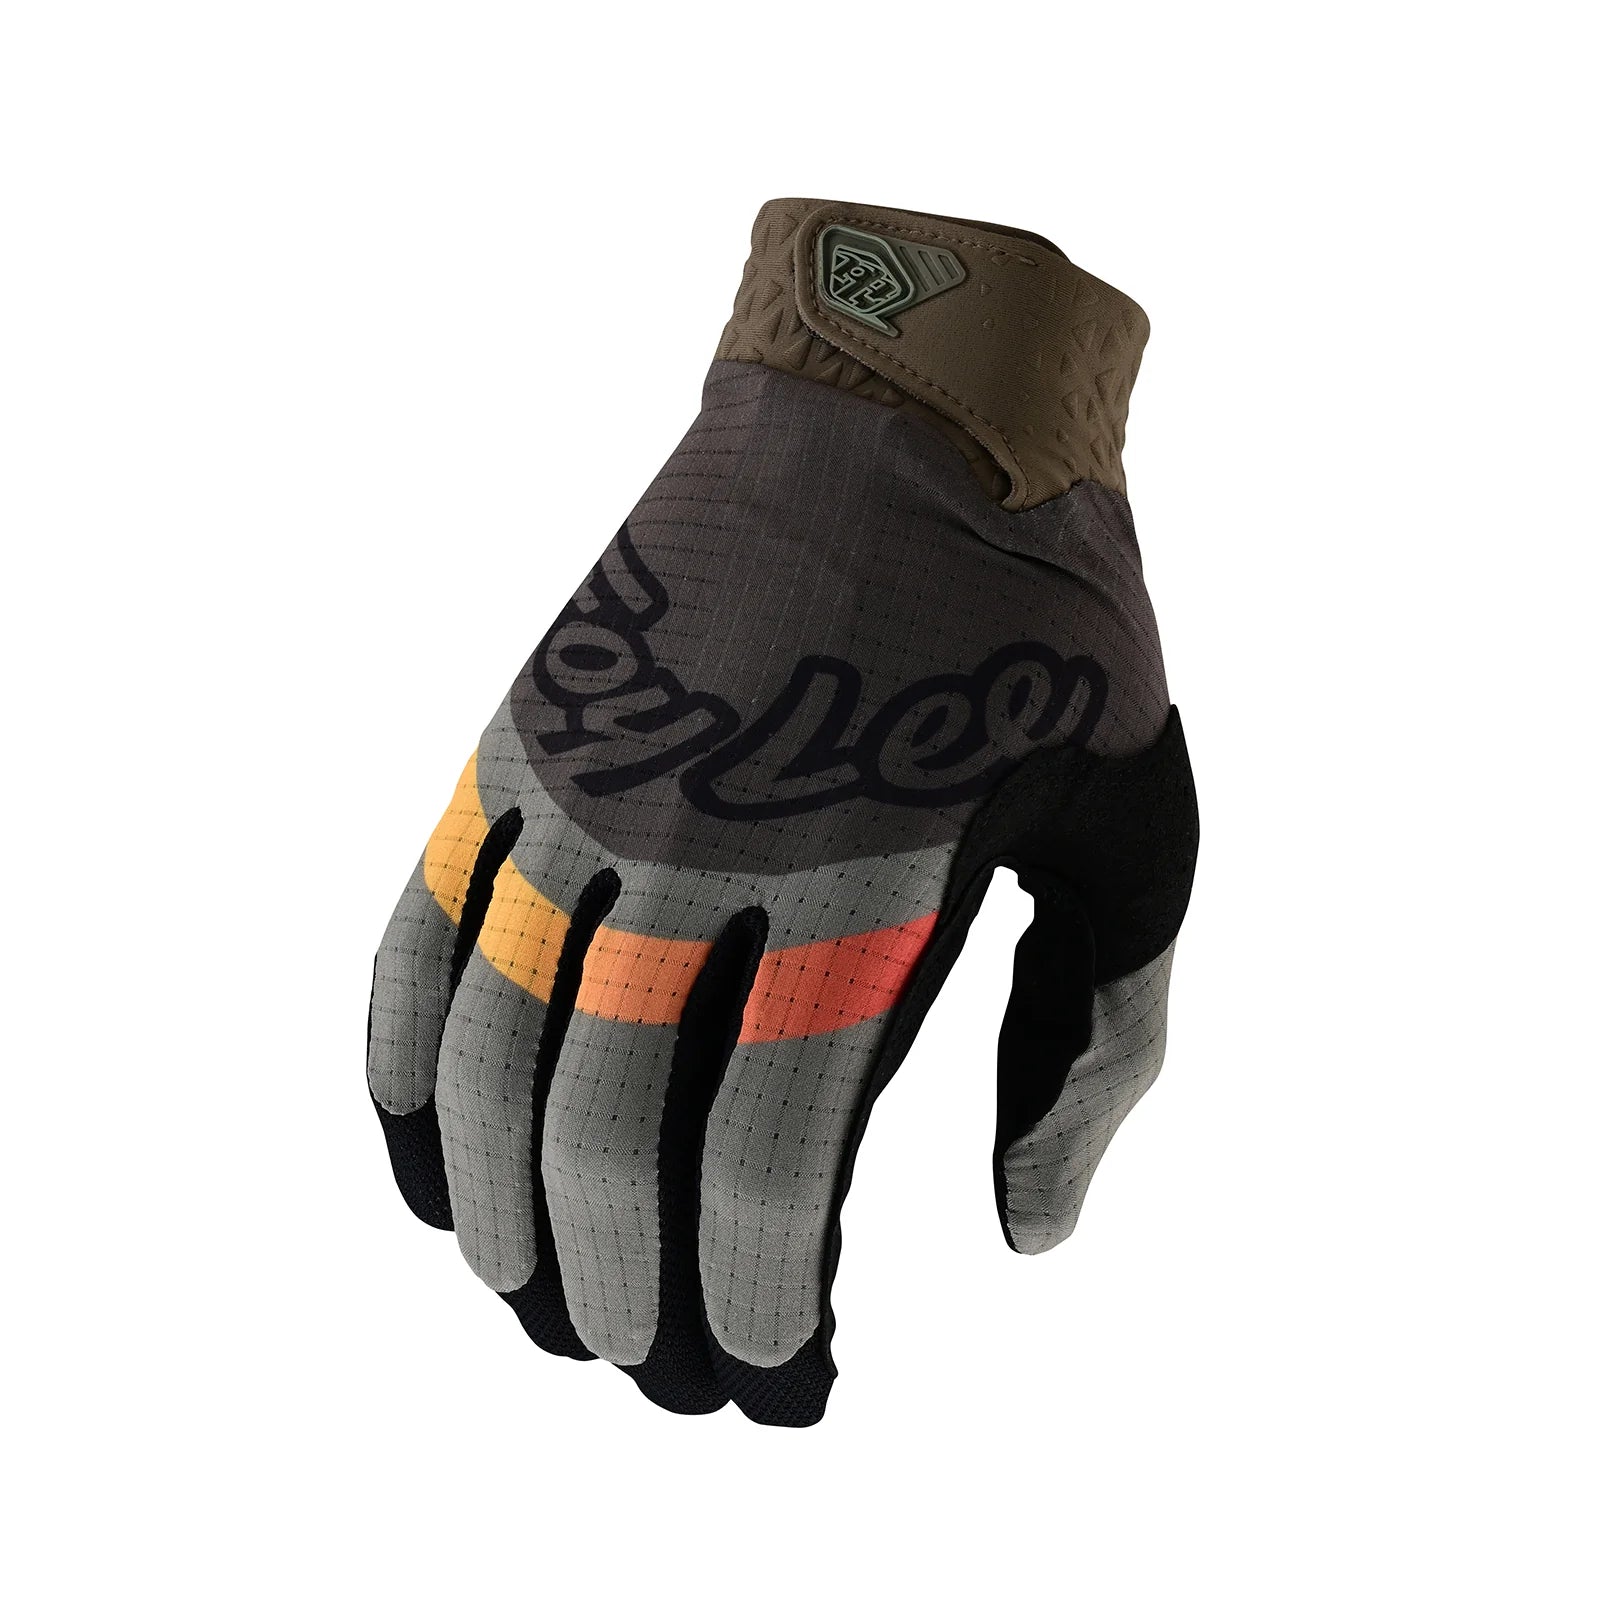 A single TLD Air Glove Pinned Olive with a colorful, striped design on the fingers offers breathability and a branded logo on the wrist strap.